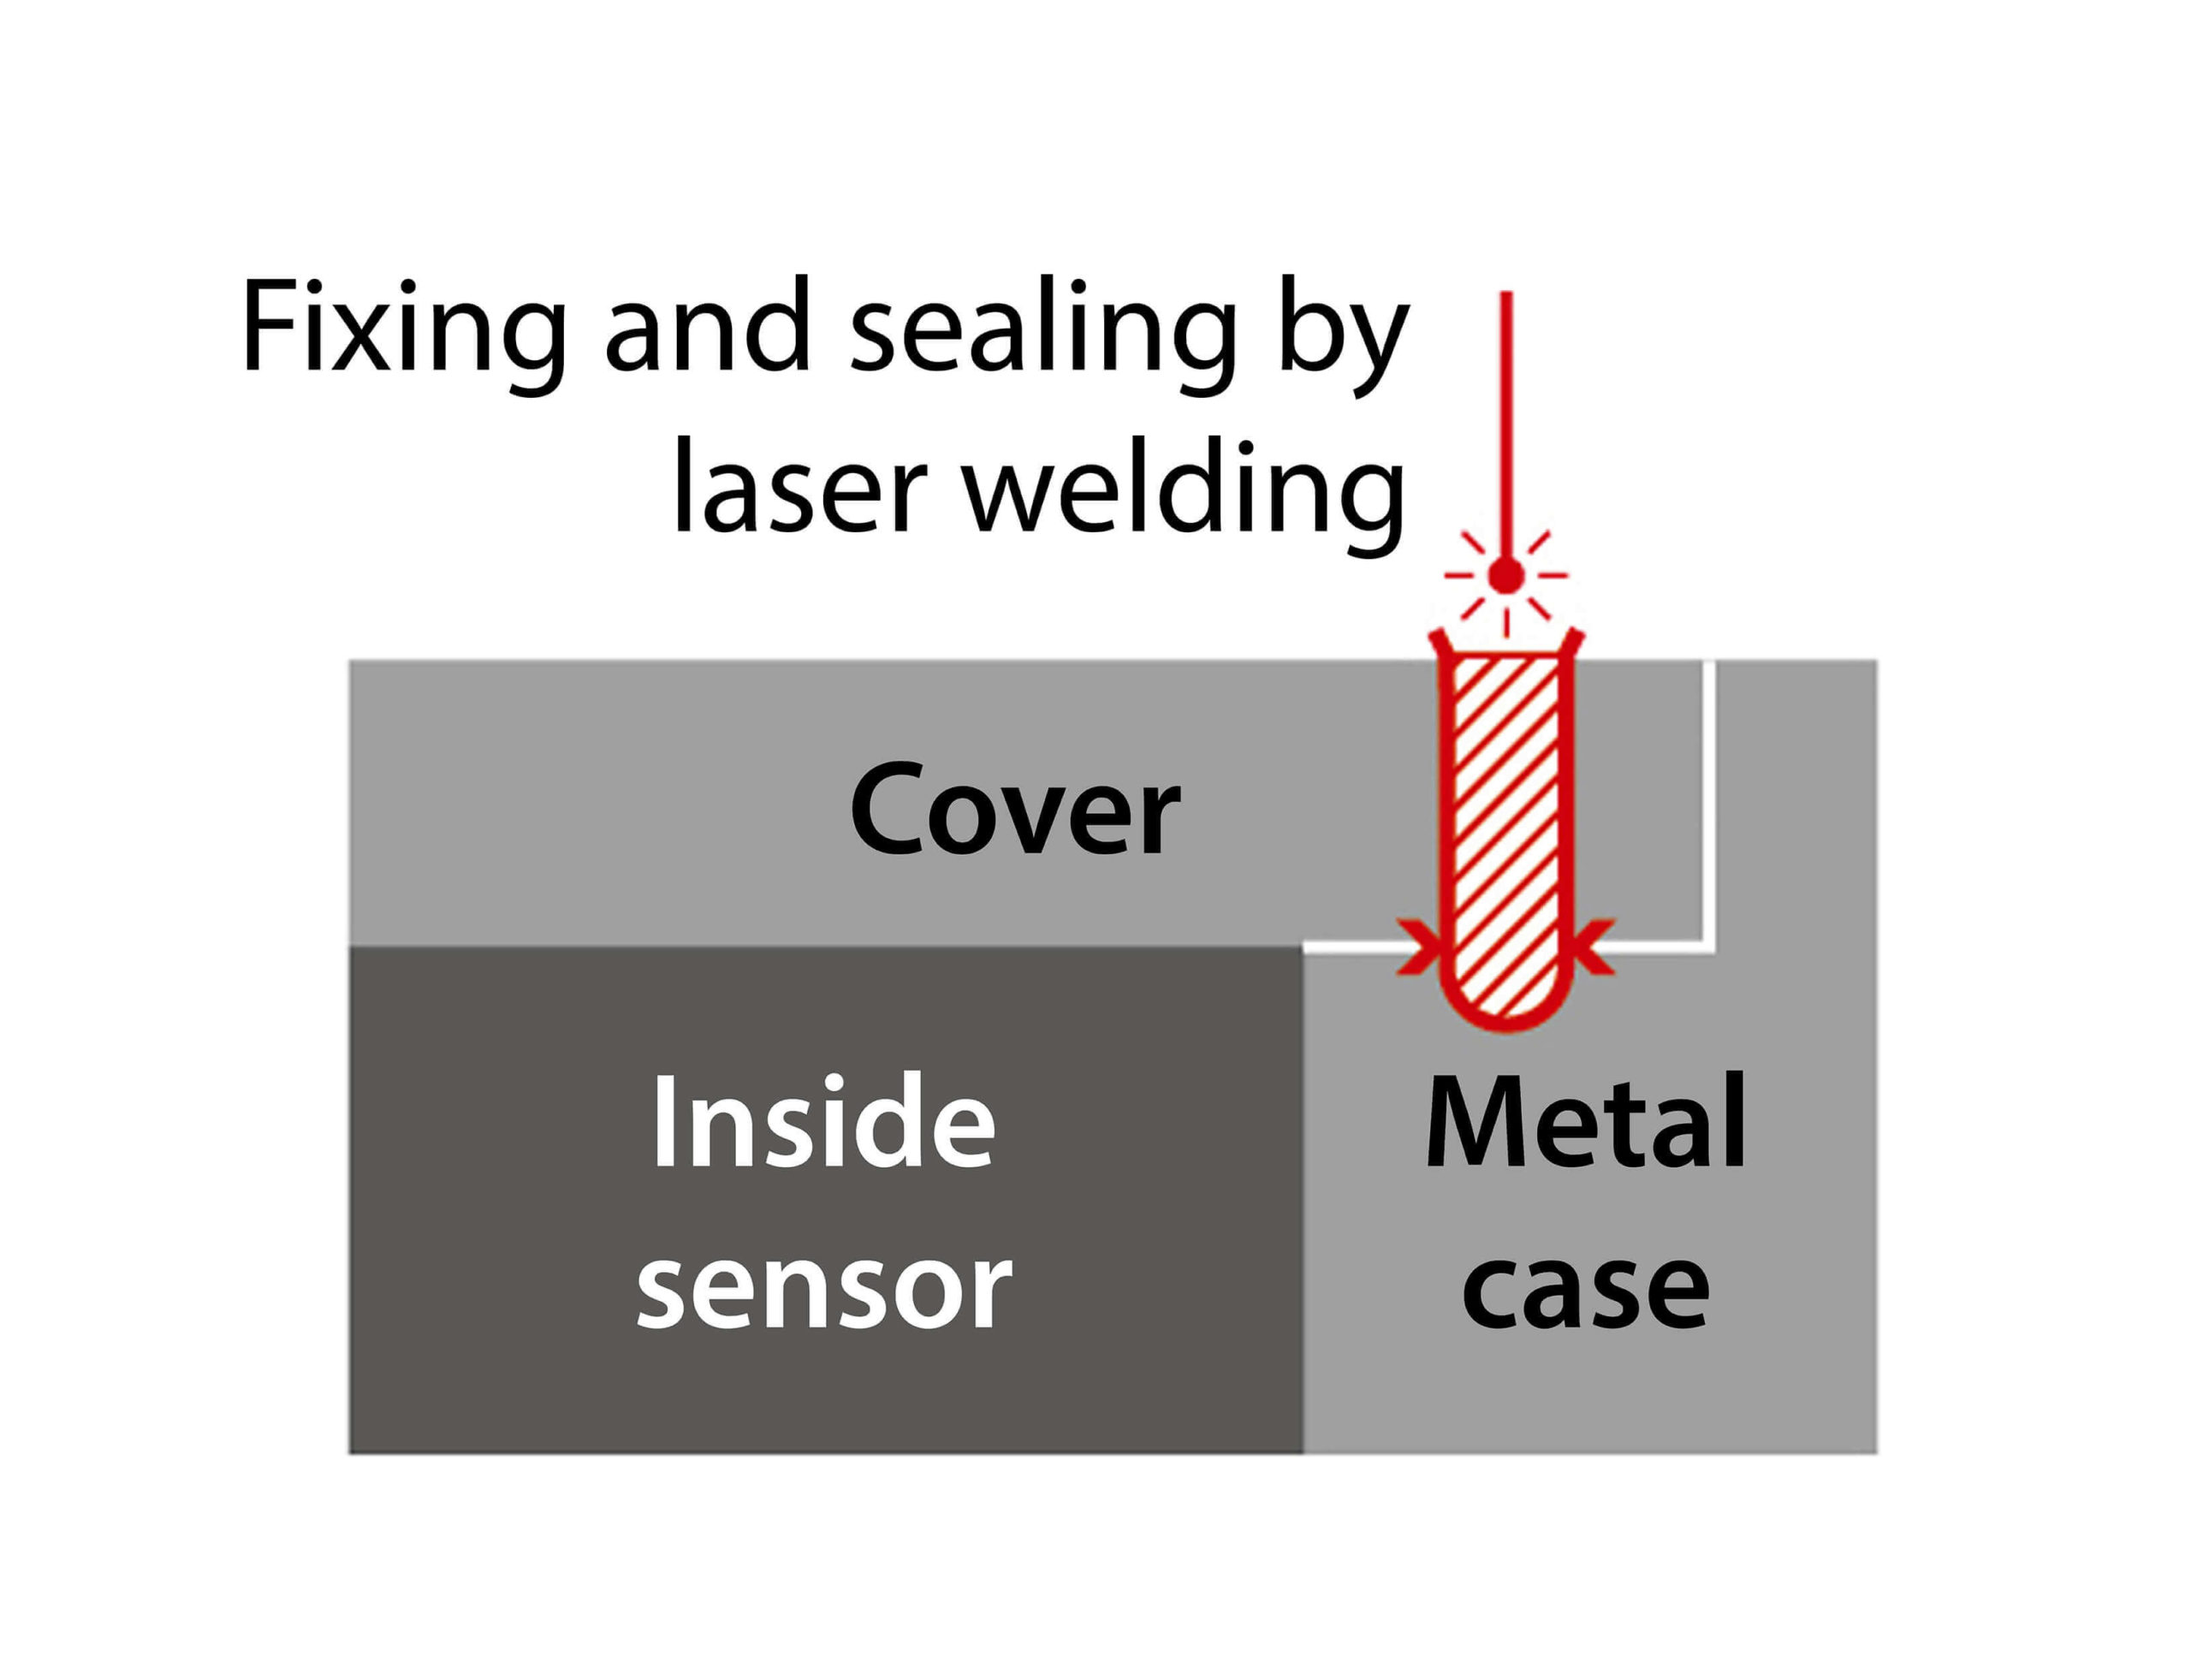 Omron’s two unique technologies, laser welding technology for different materials and laser welding technology for metals, enhanced the sealing and adhesion between stainless steel and resin.